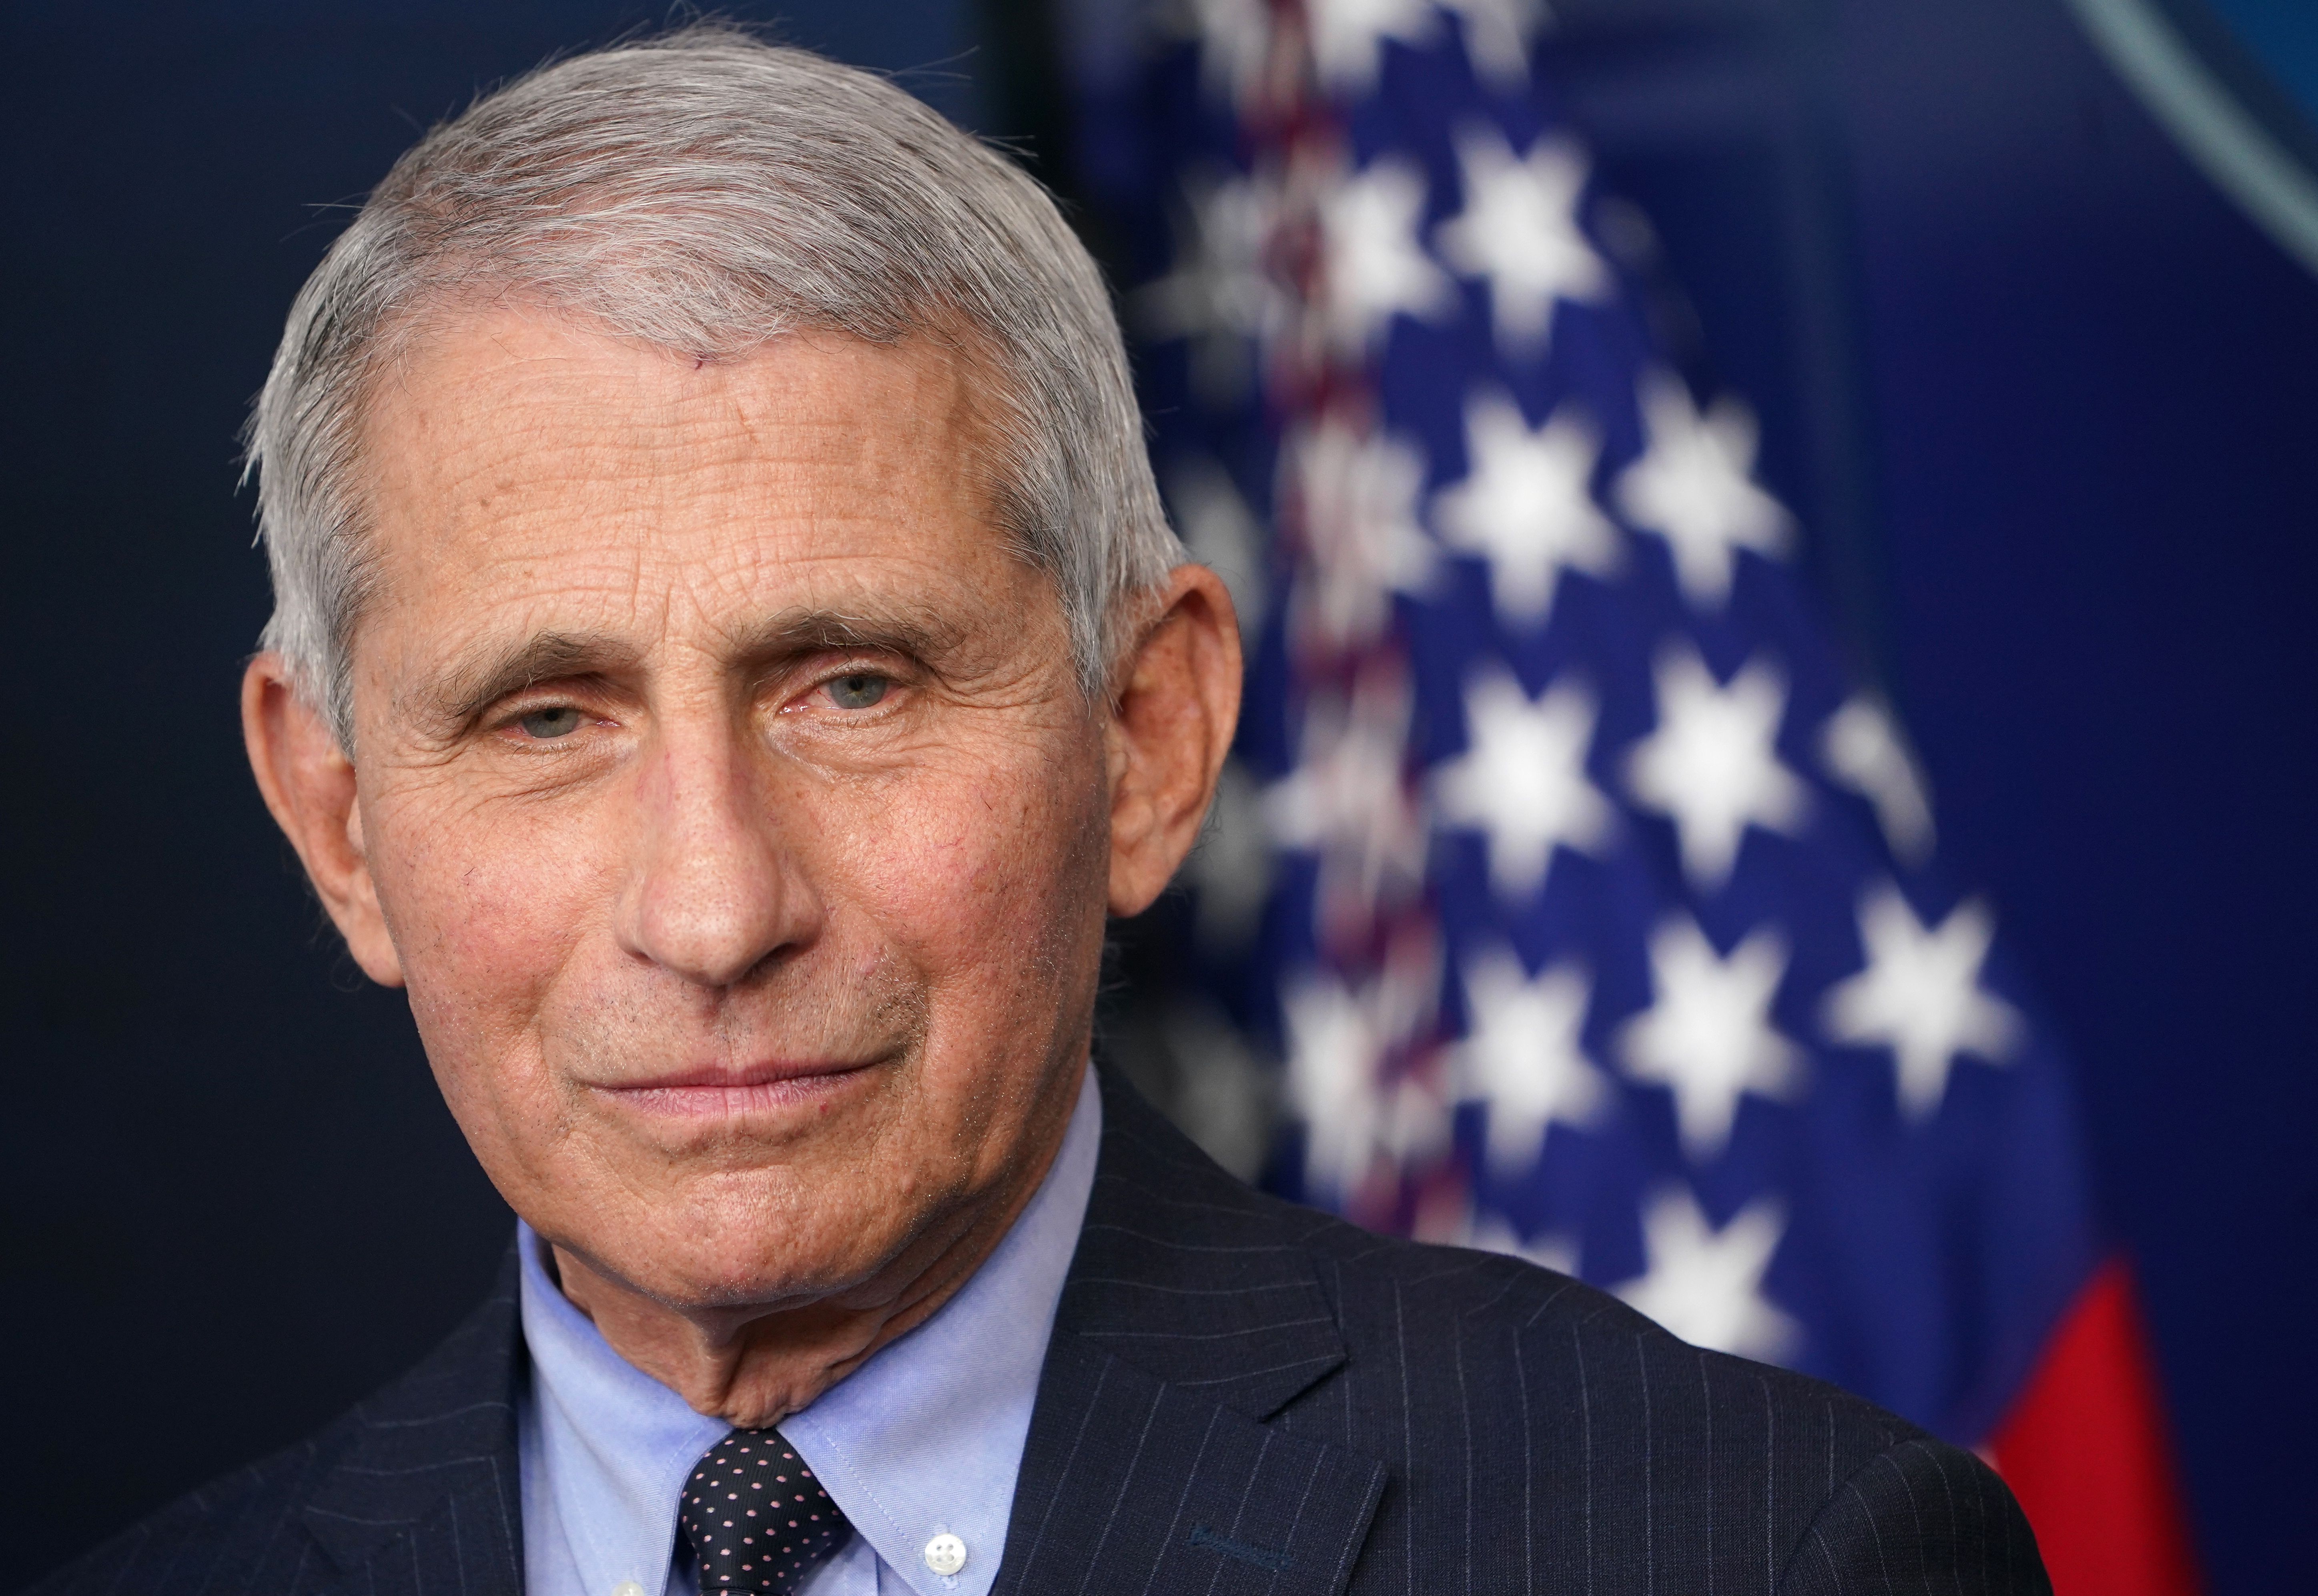 Director of the National Institute of Allergy and Infectious Diseases Anthony Fauci looks on during the daily briefing in the Brady Briefing Room of the White House in Washington